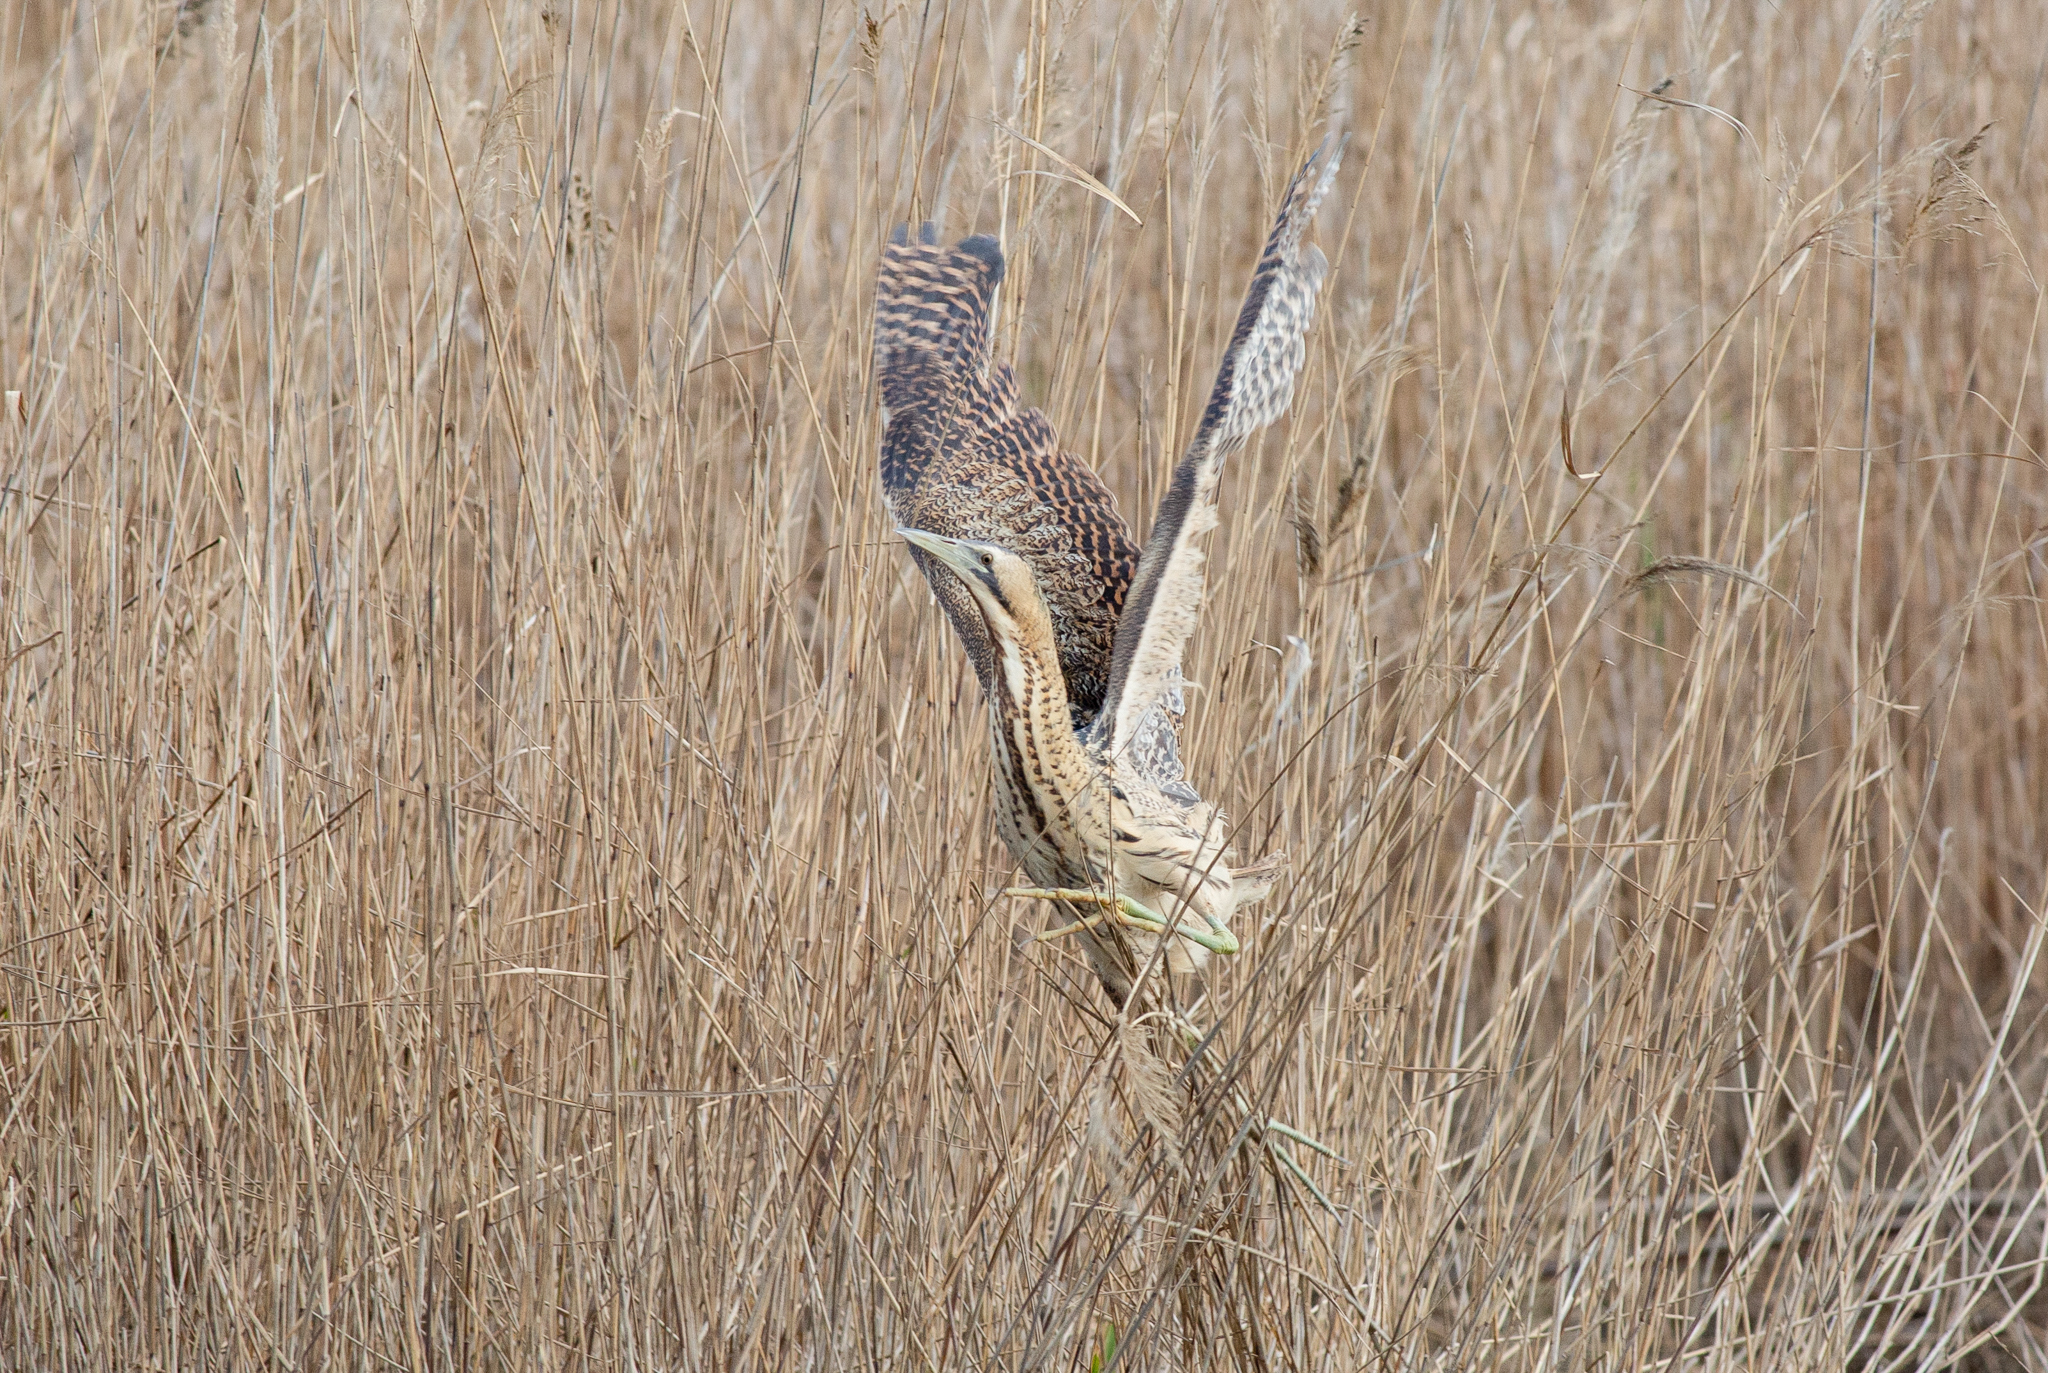 Take-off of the bittern...